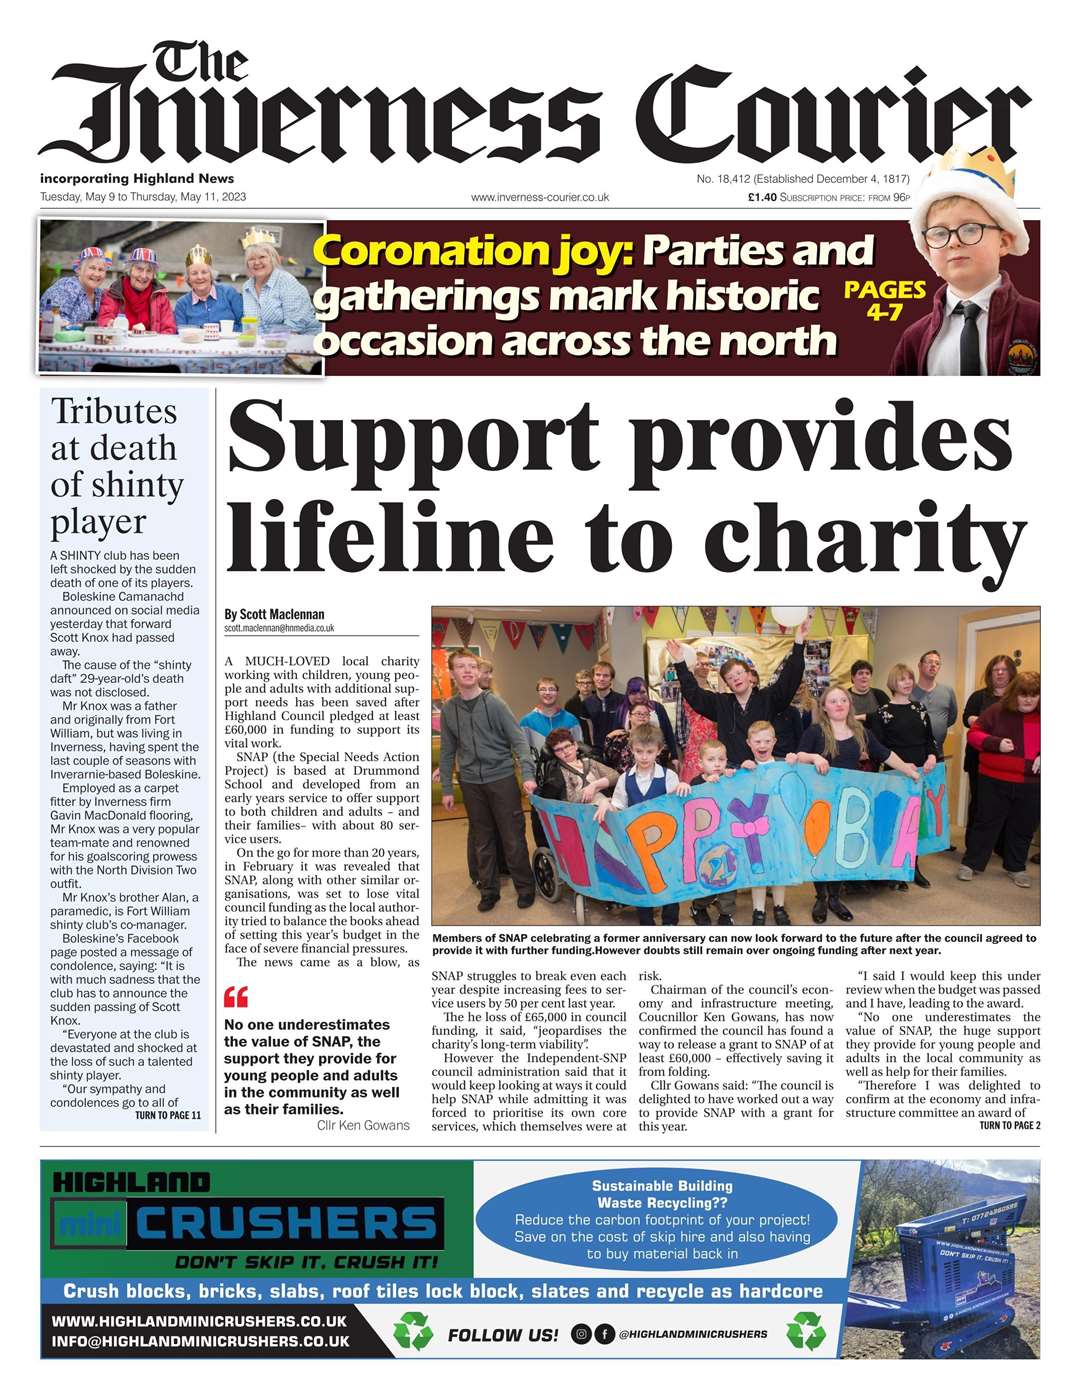 The Inverness Courier, May 9, front page.